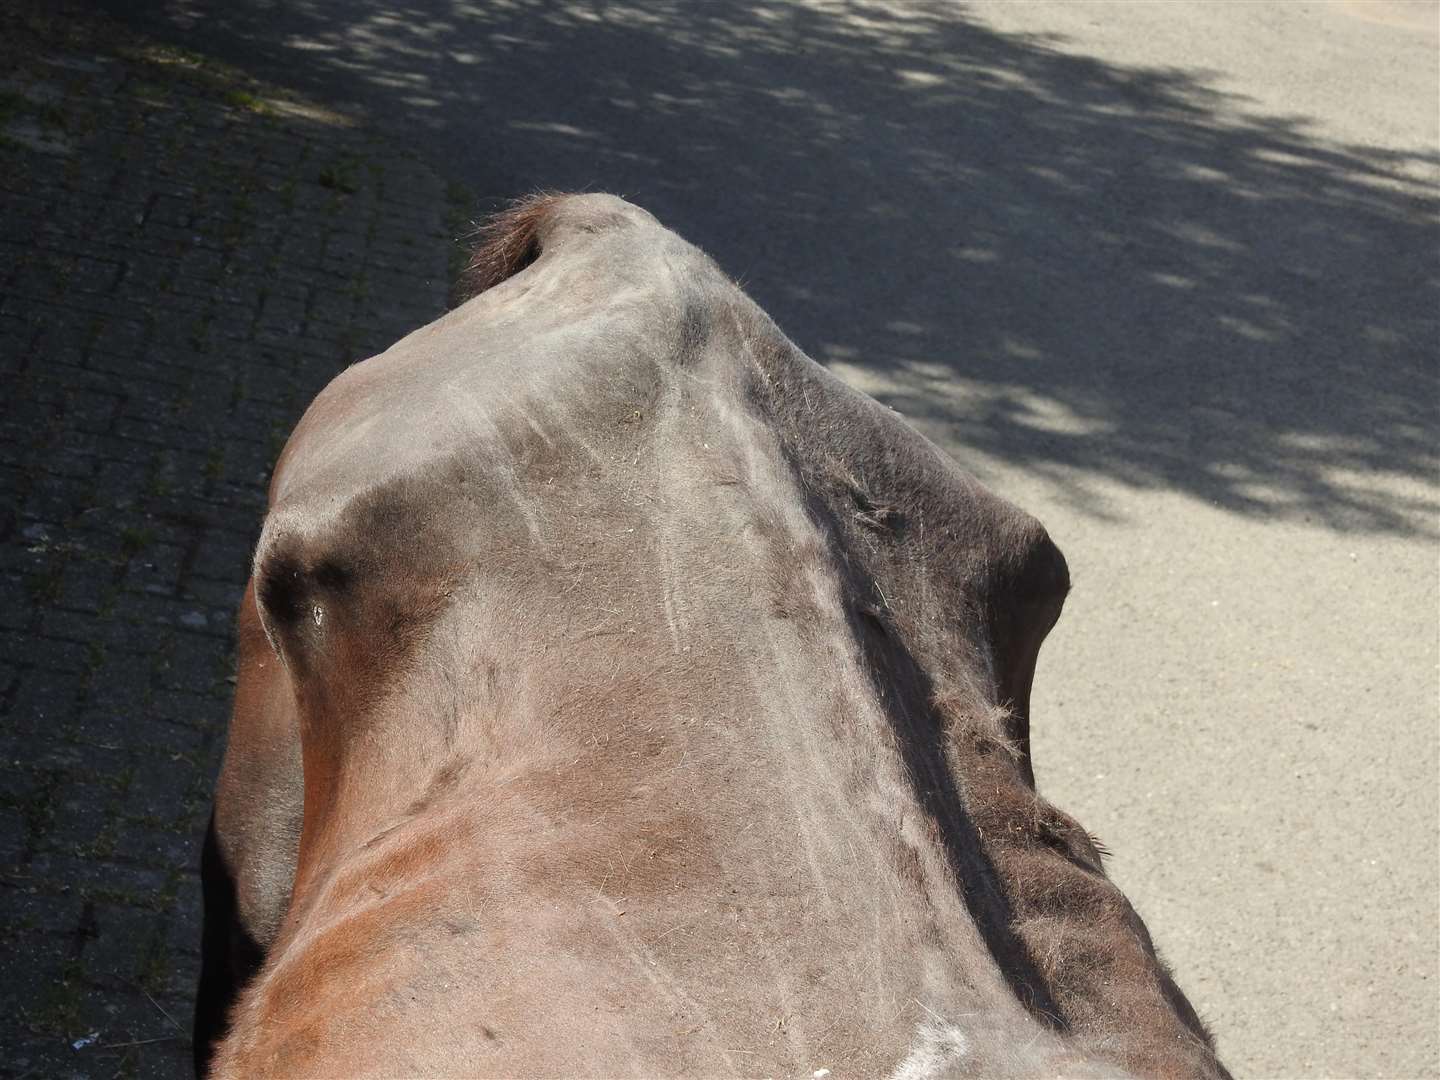 The horse was extremely malnourished and may not pull through despite treatment (2672968)